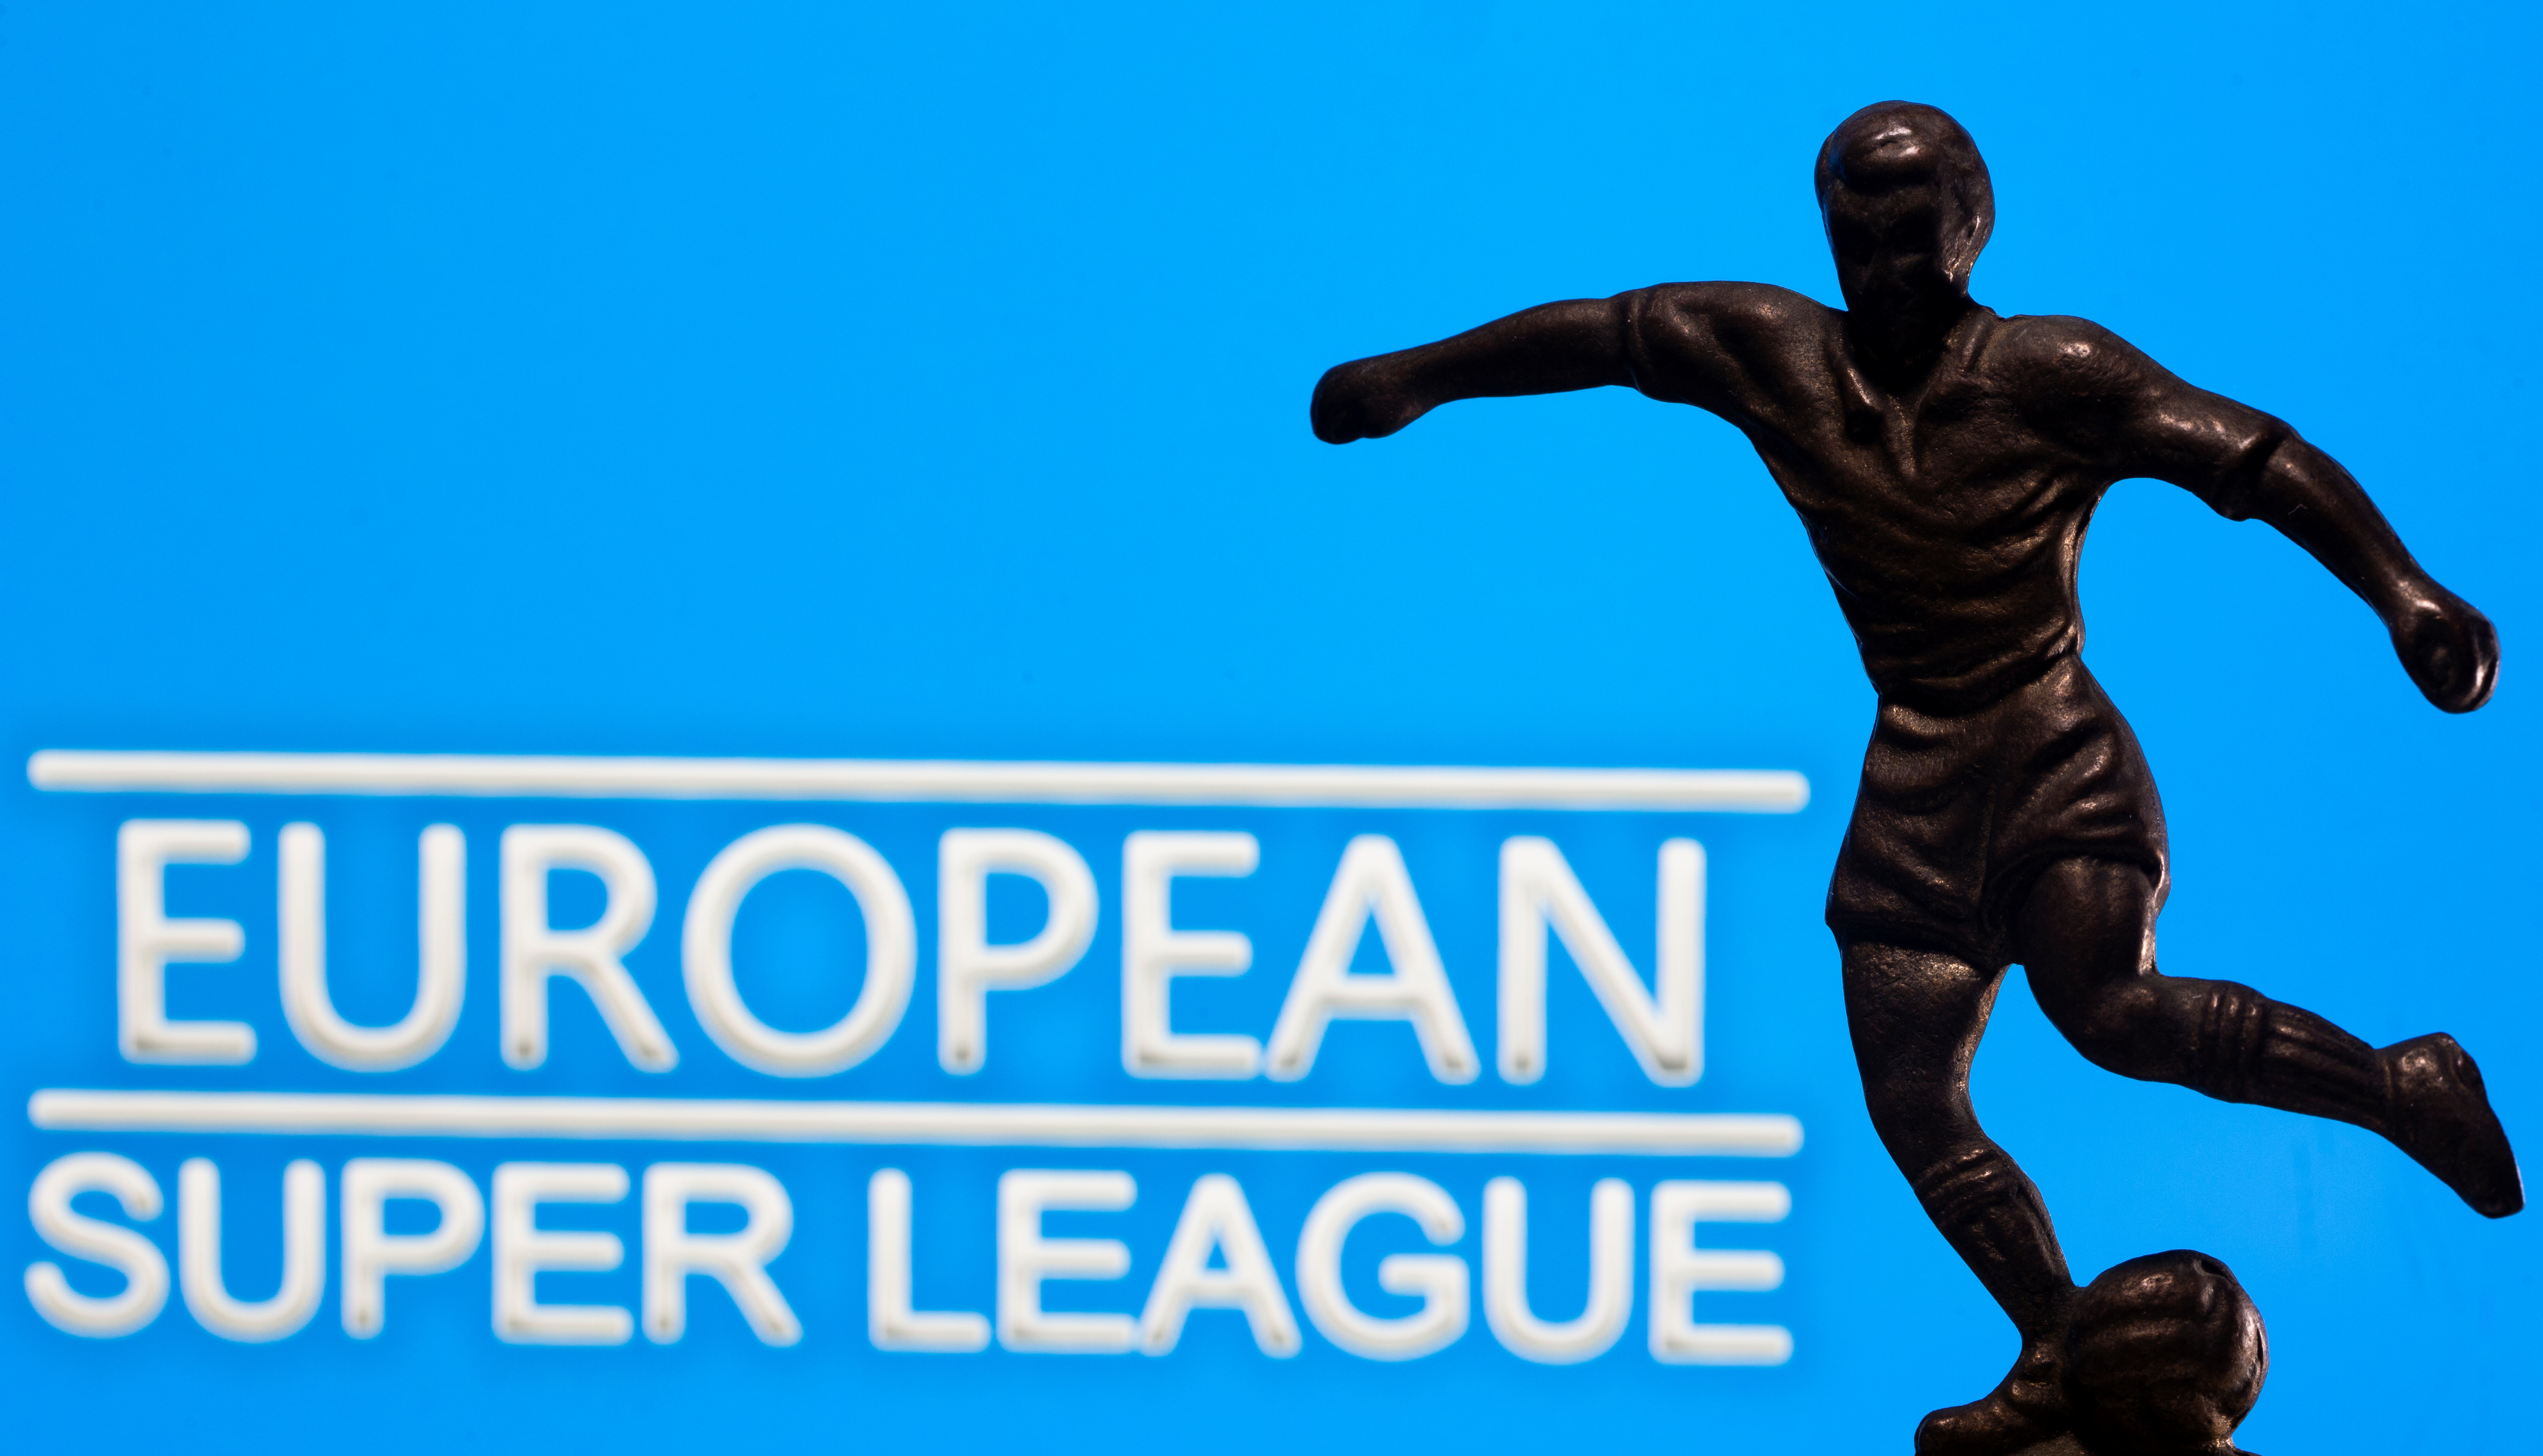 A metal figure of a football player with a ball is seen in front of the words 